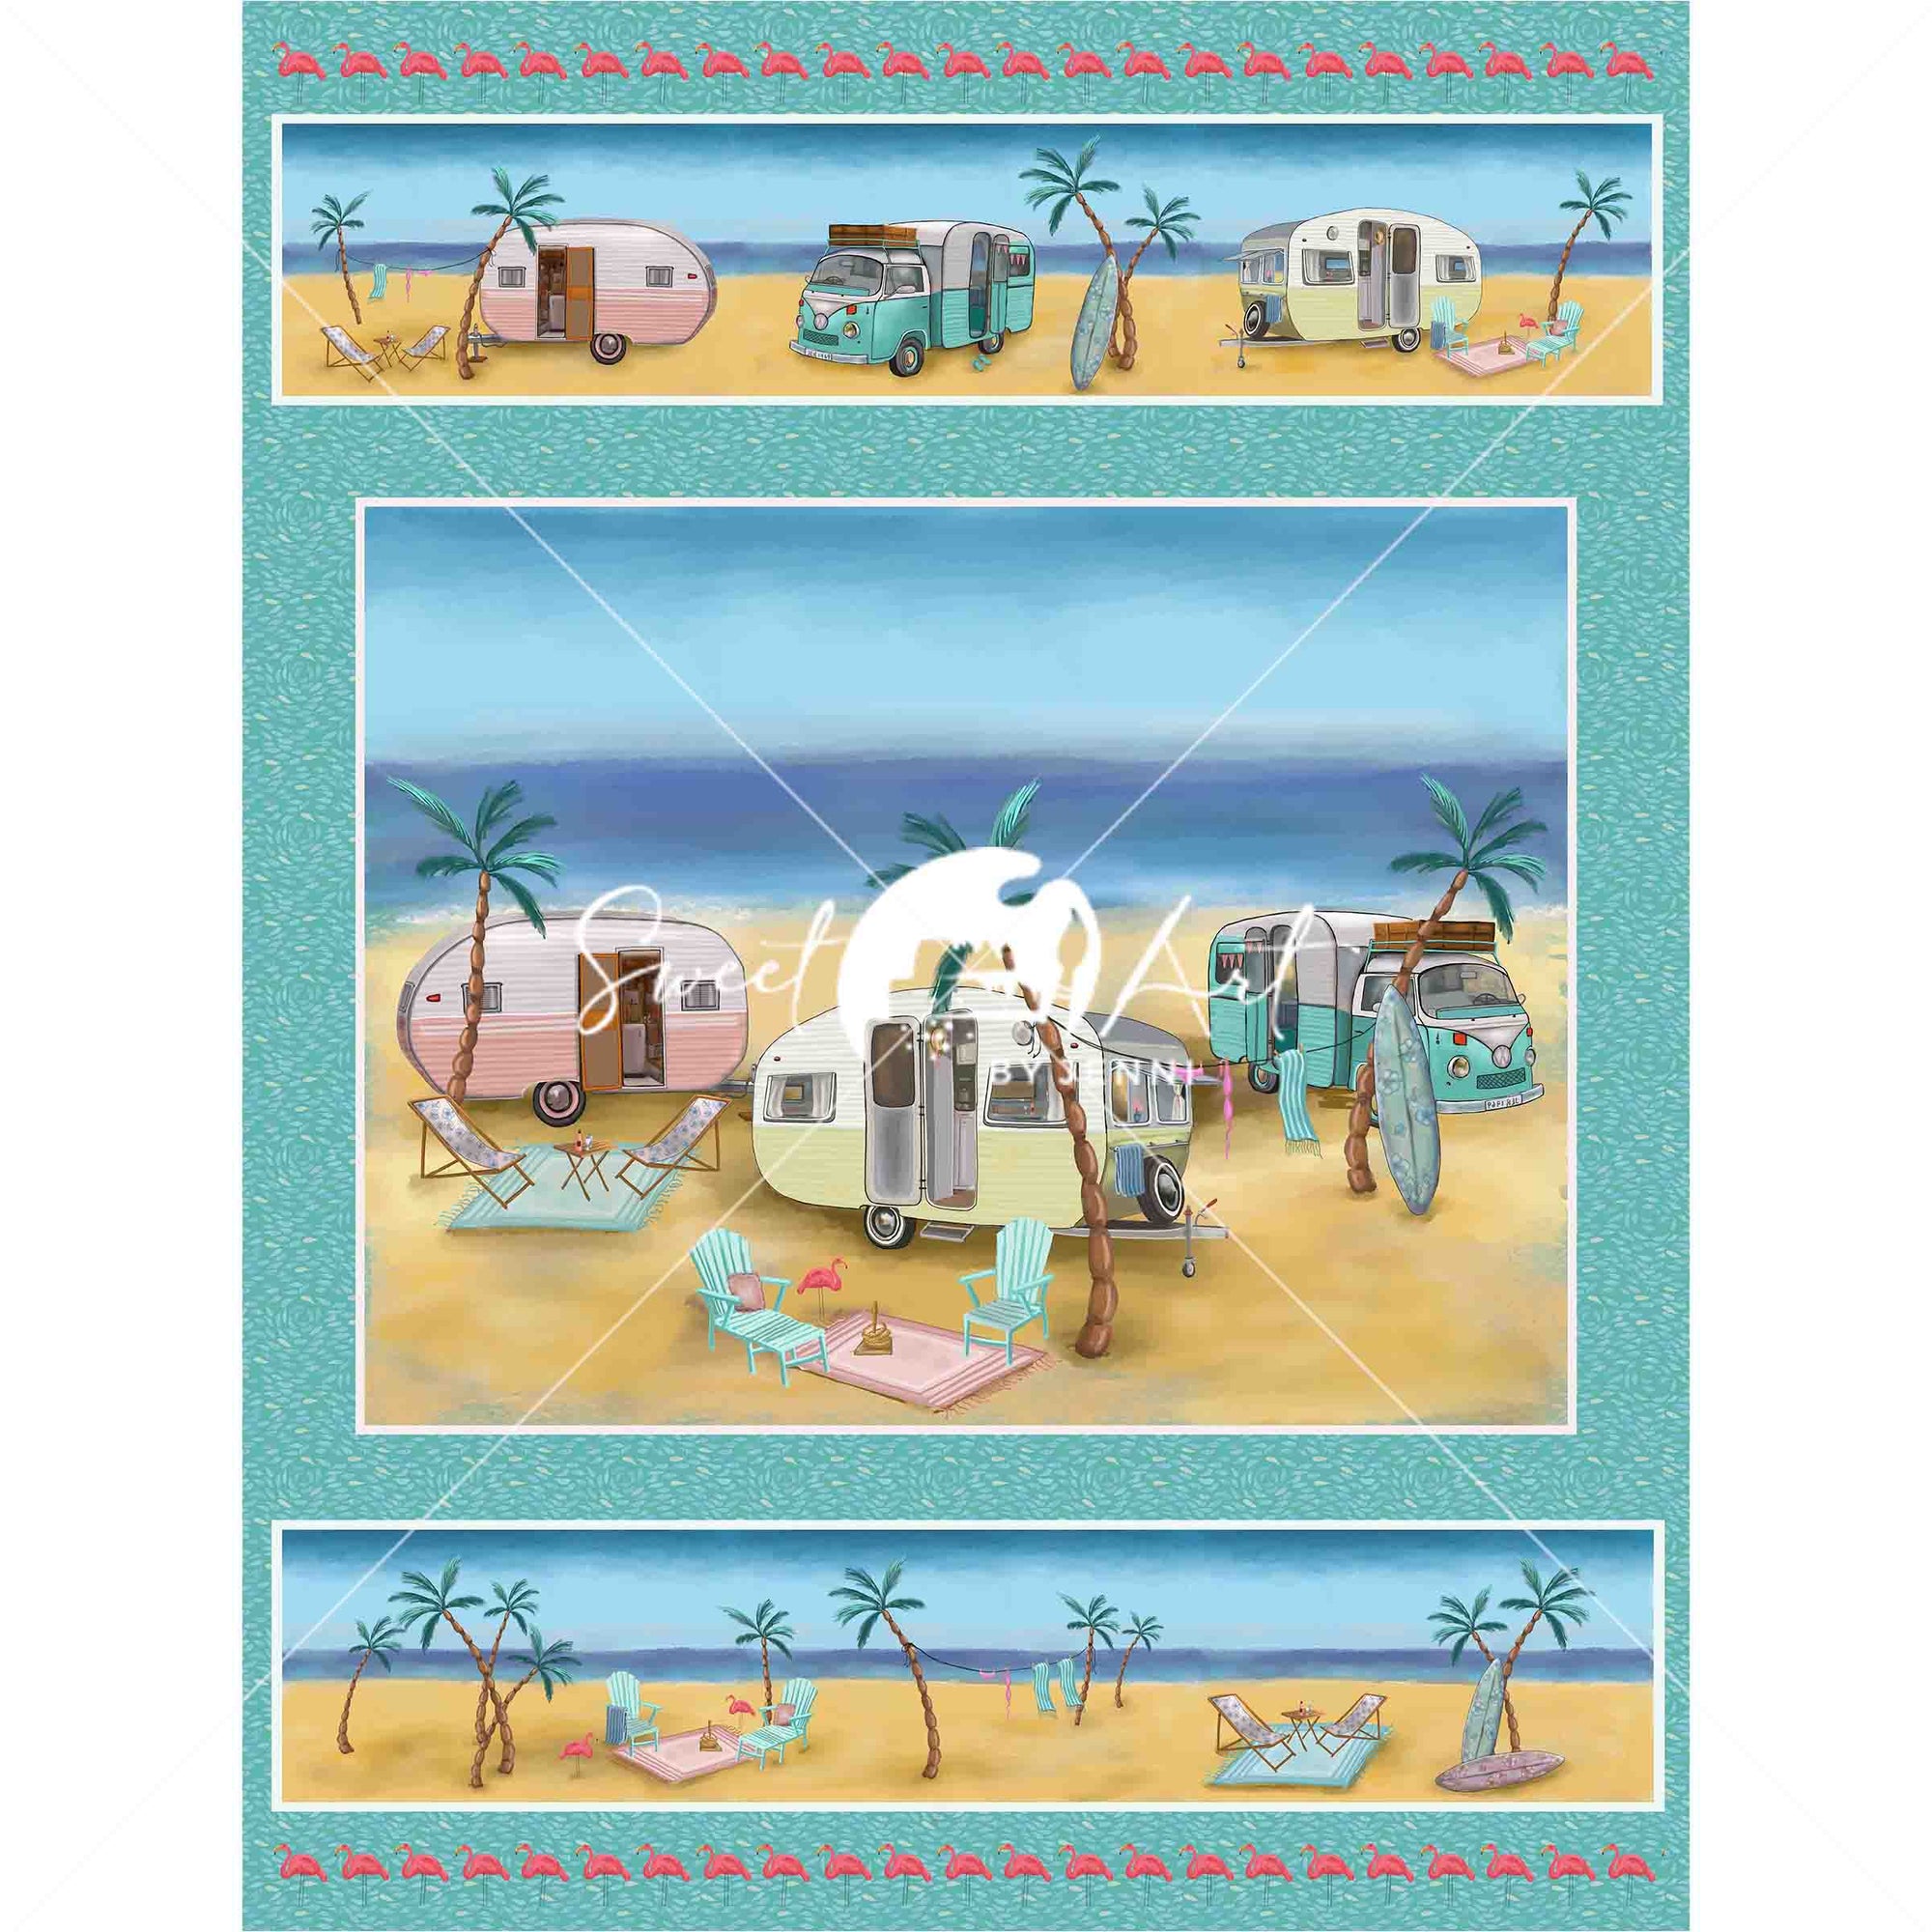 Retro caravan suitable for fabric panel by Jenni Rogers Surface Pattern designer and artist